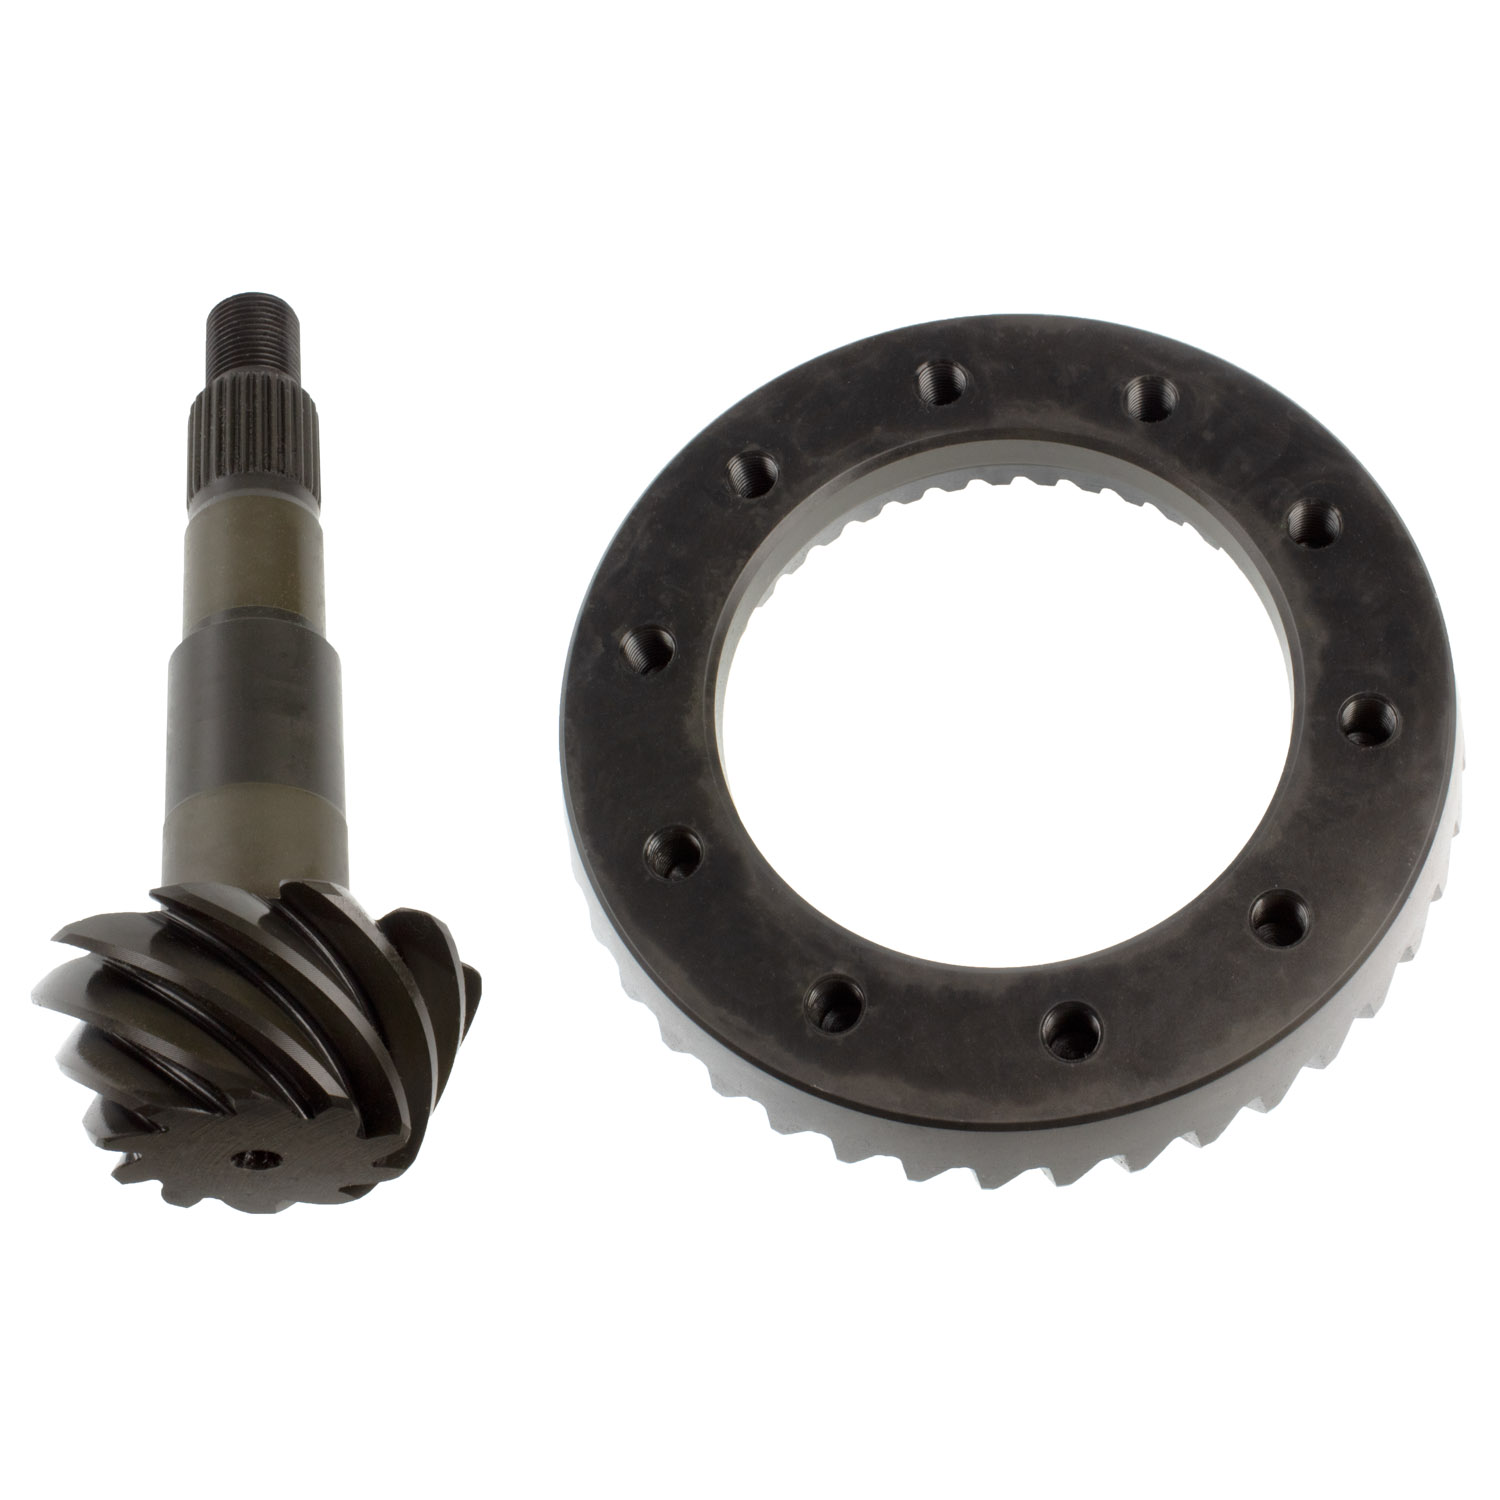 Dana 30 Reverse/High Pinion D30-410F 4.1 Ratio Performance Ring and Pinion Differential Set 41-10 Teeth Motive Gear 